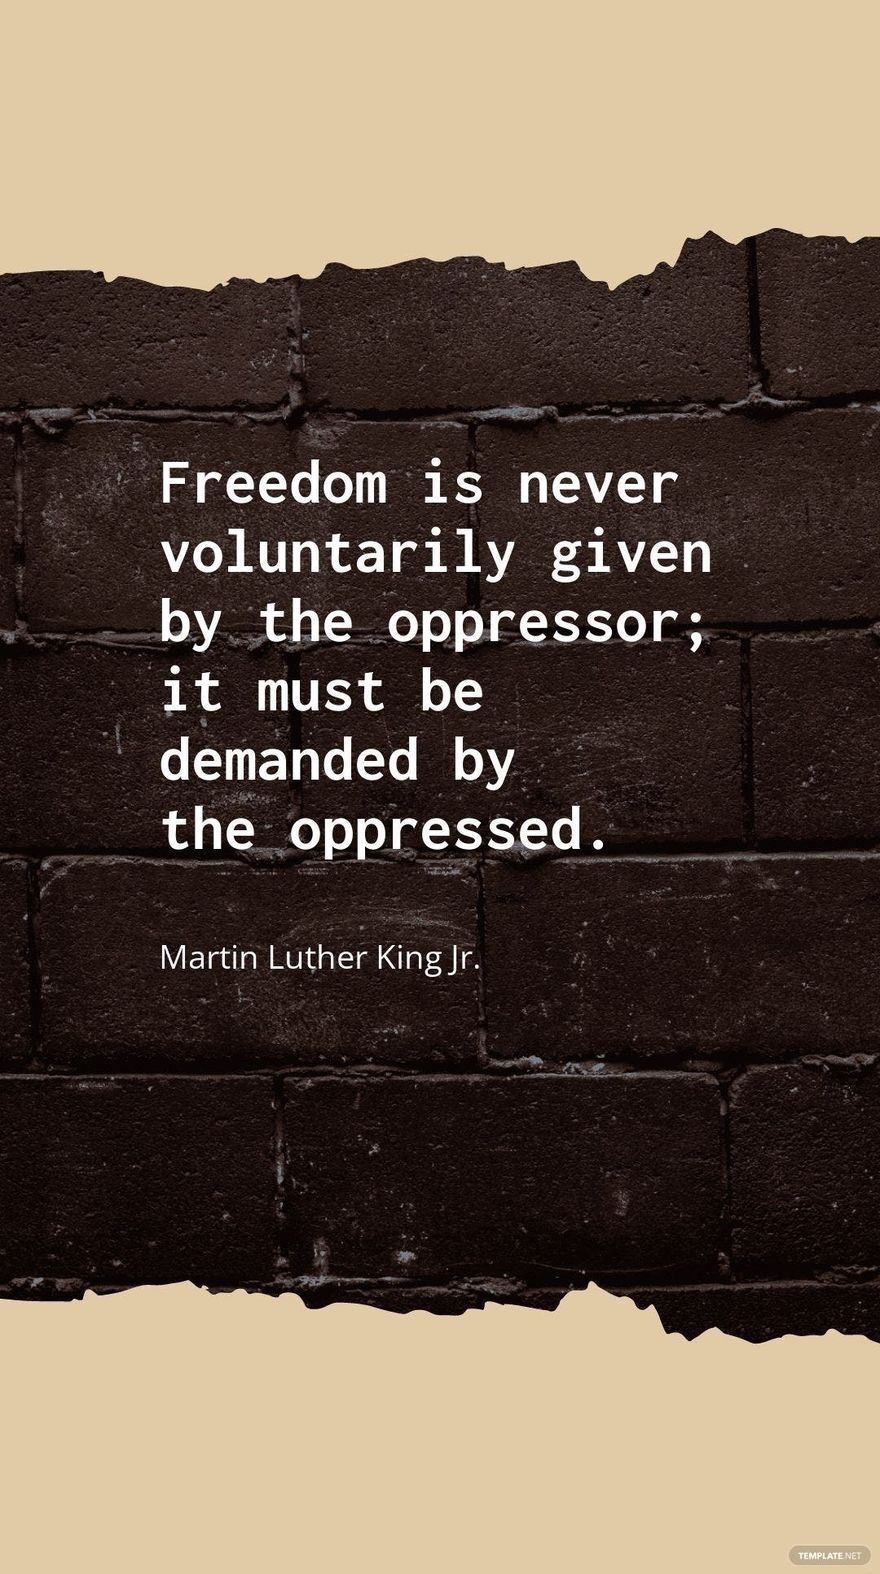 Martin Luther King Jr. - Freedom is never voluntarily given by the oppressor; it must be demanded by the oppressed. in JPG